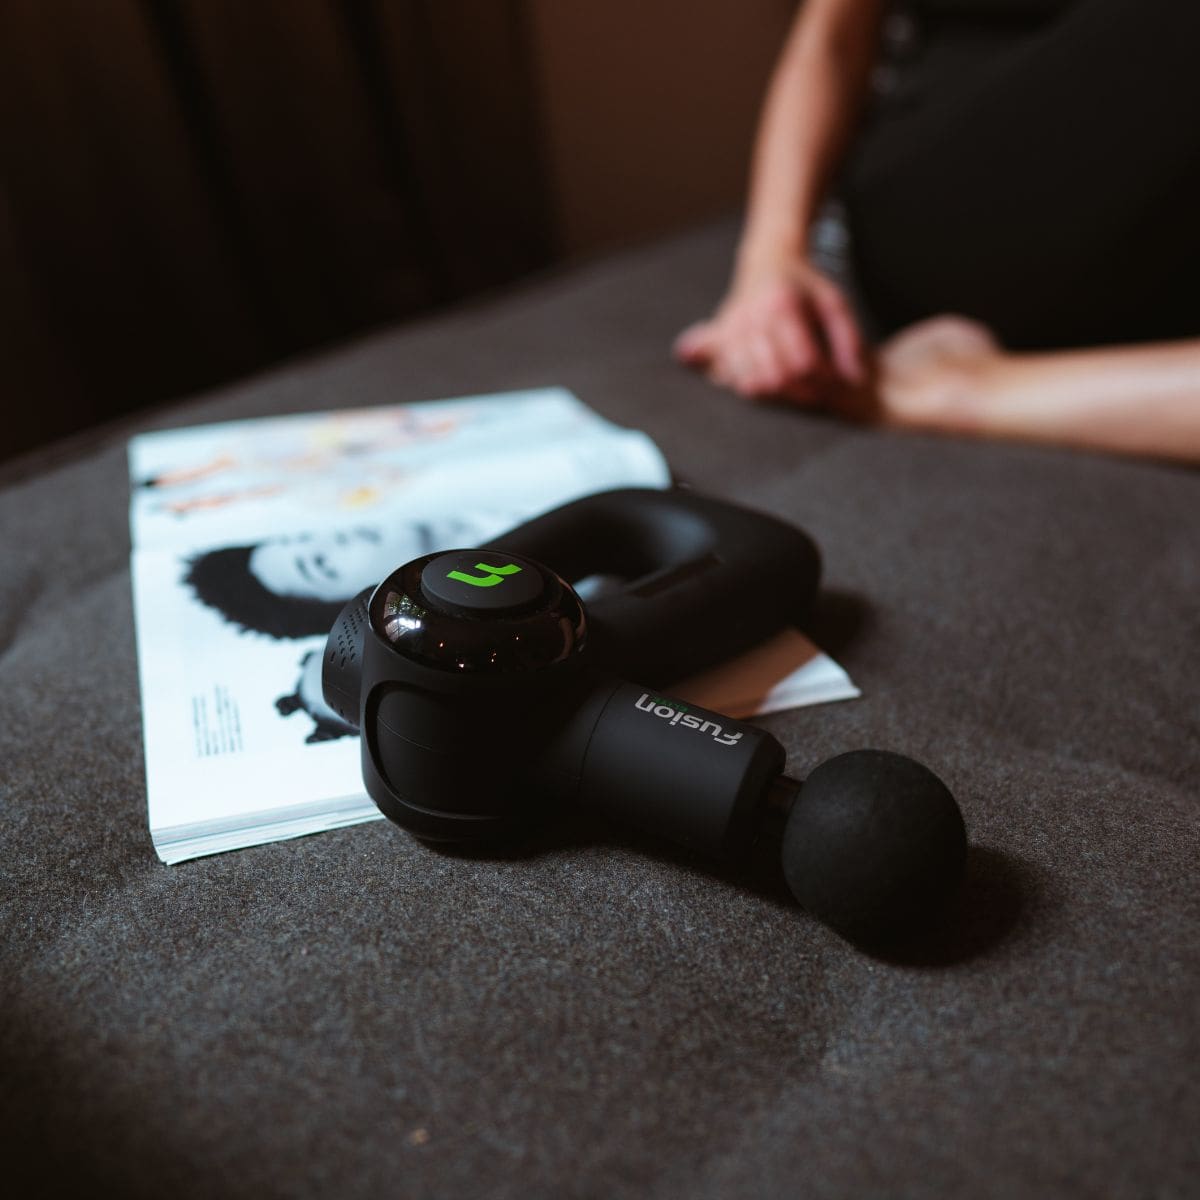 Do Massage Guns Really Work? Here's All You Need to Know Before Investing in One